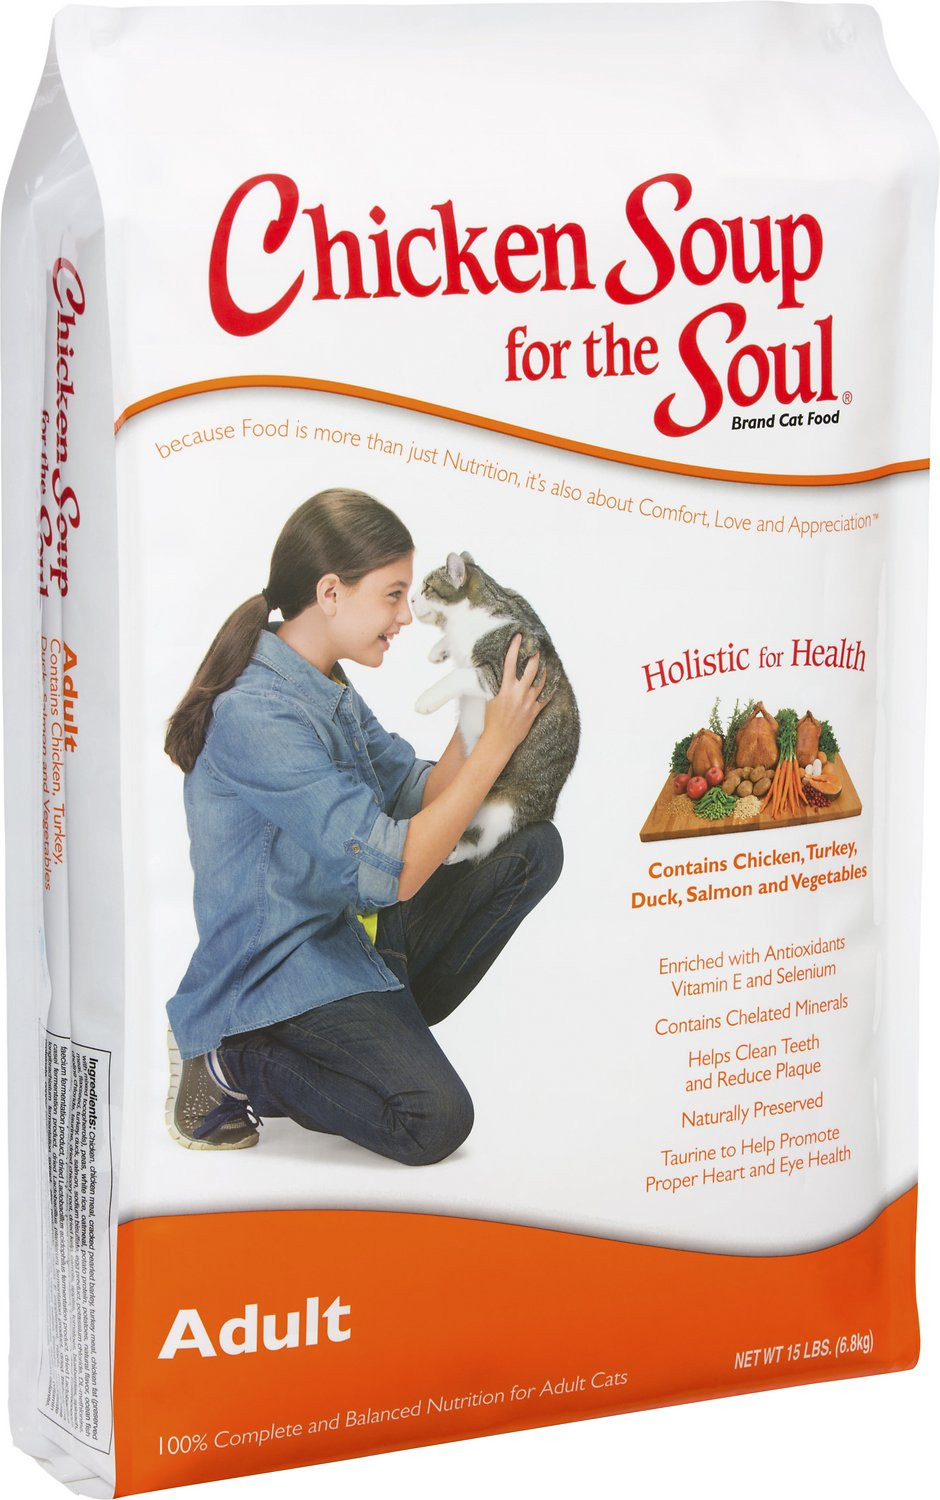 Chicken Soup Cat Food
 Chicken Soup for the Soul Adult Dry Cat Food 15 lb bag